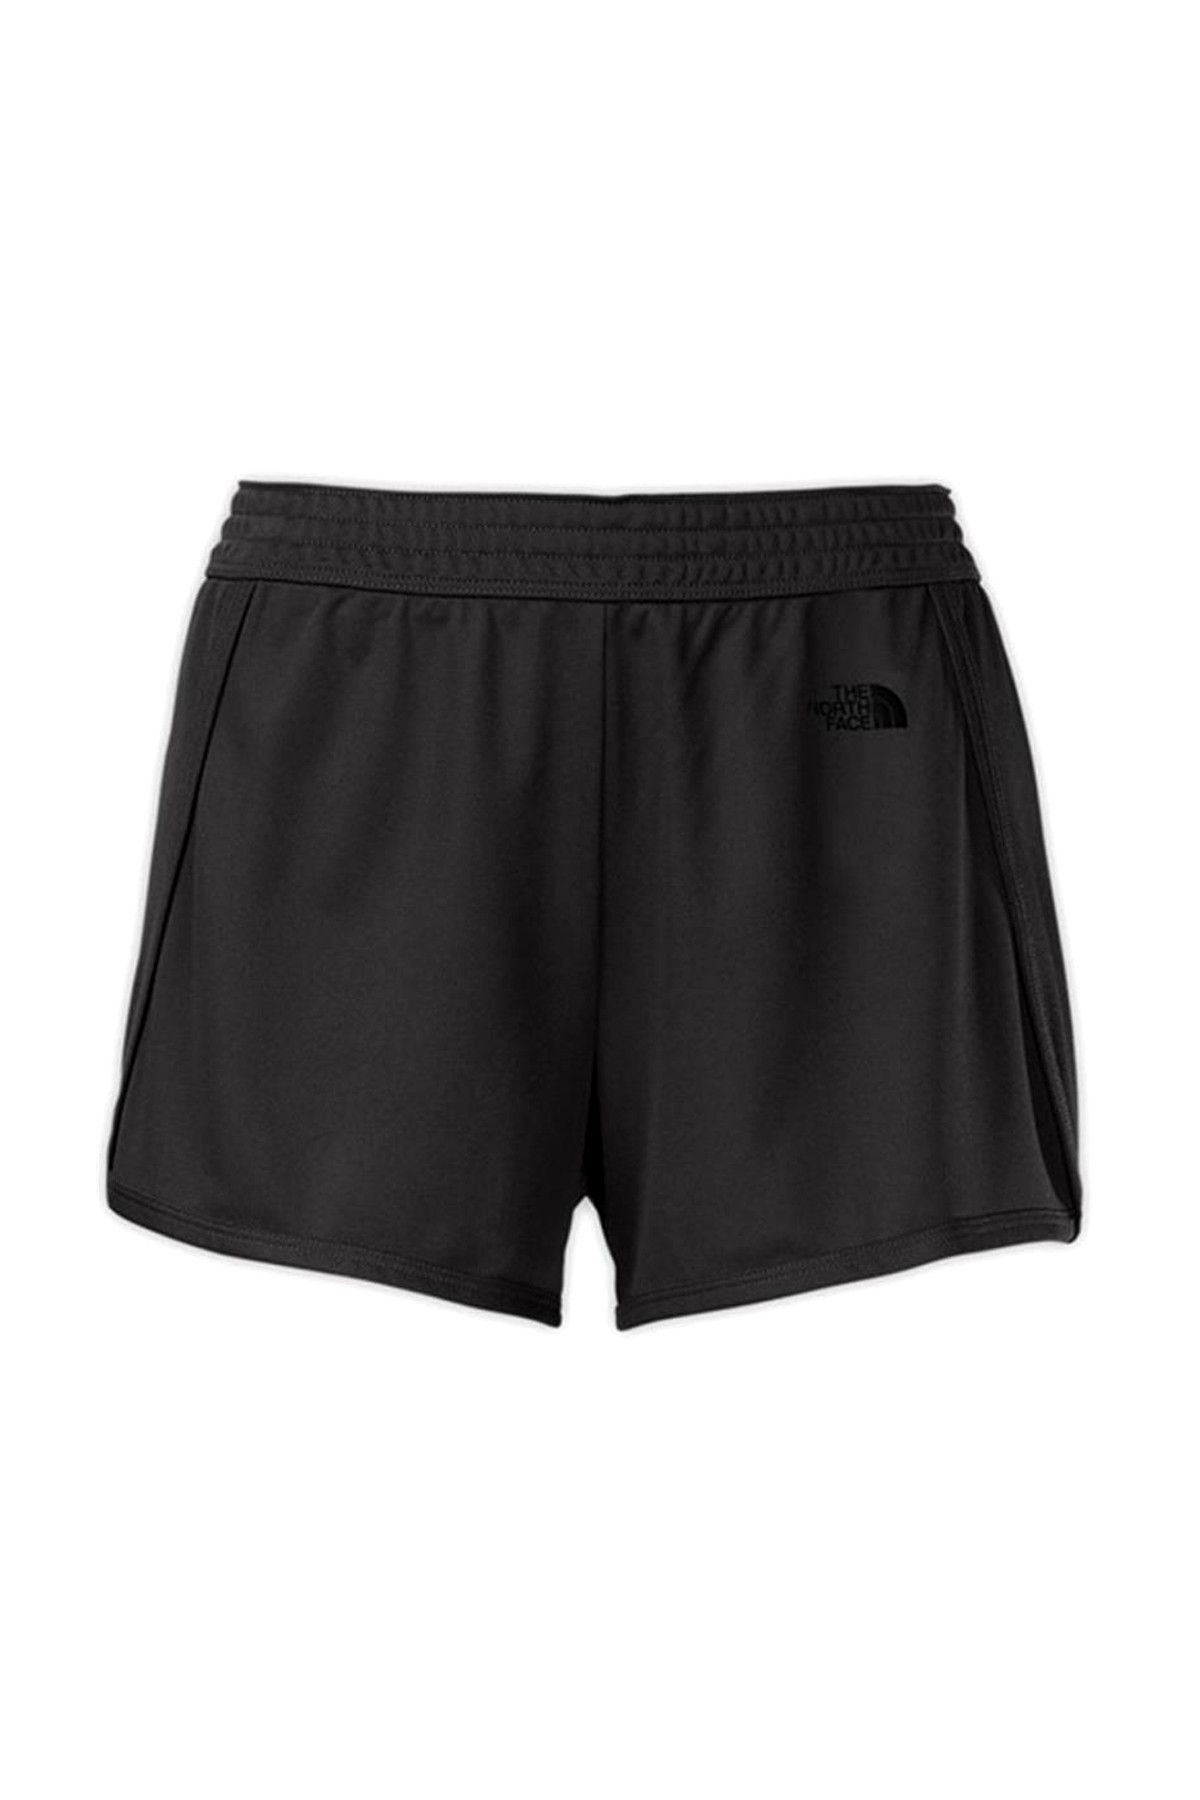 The North Face - W Pulse Short